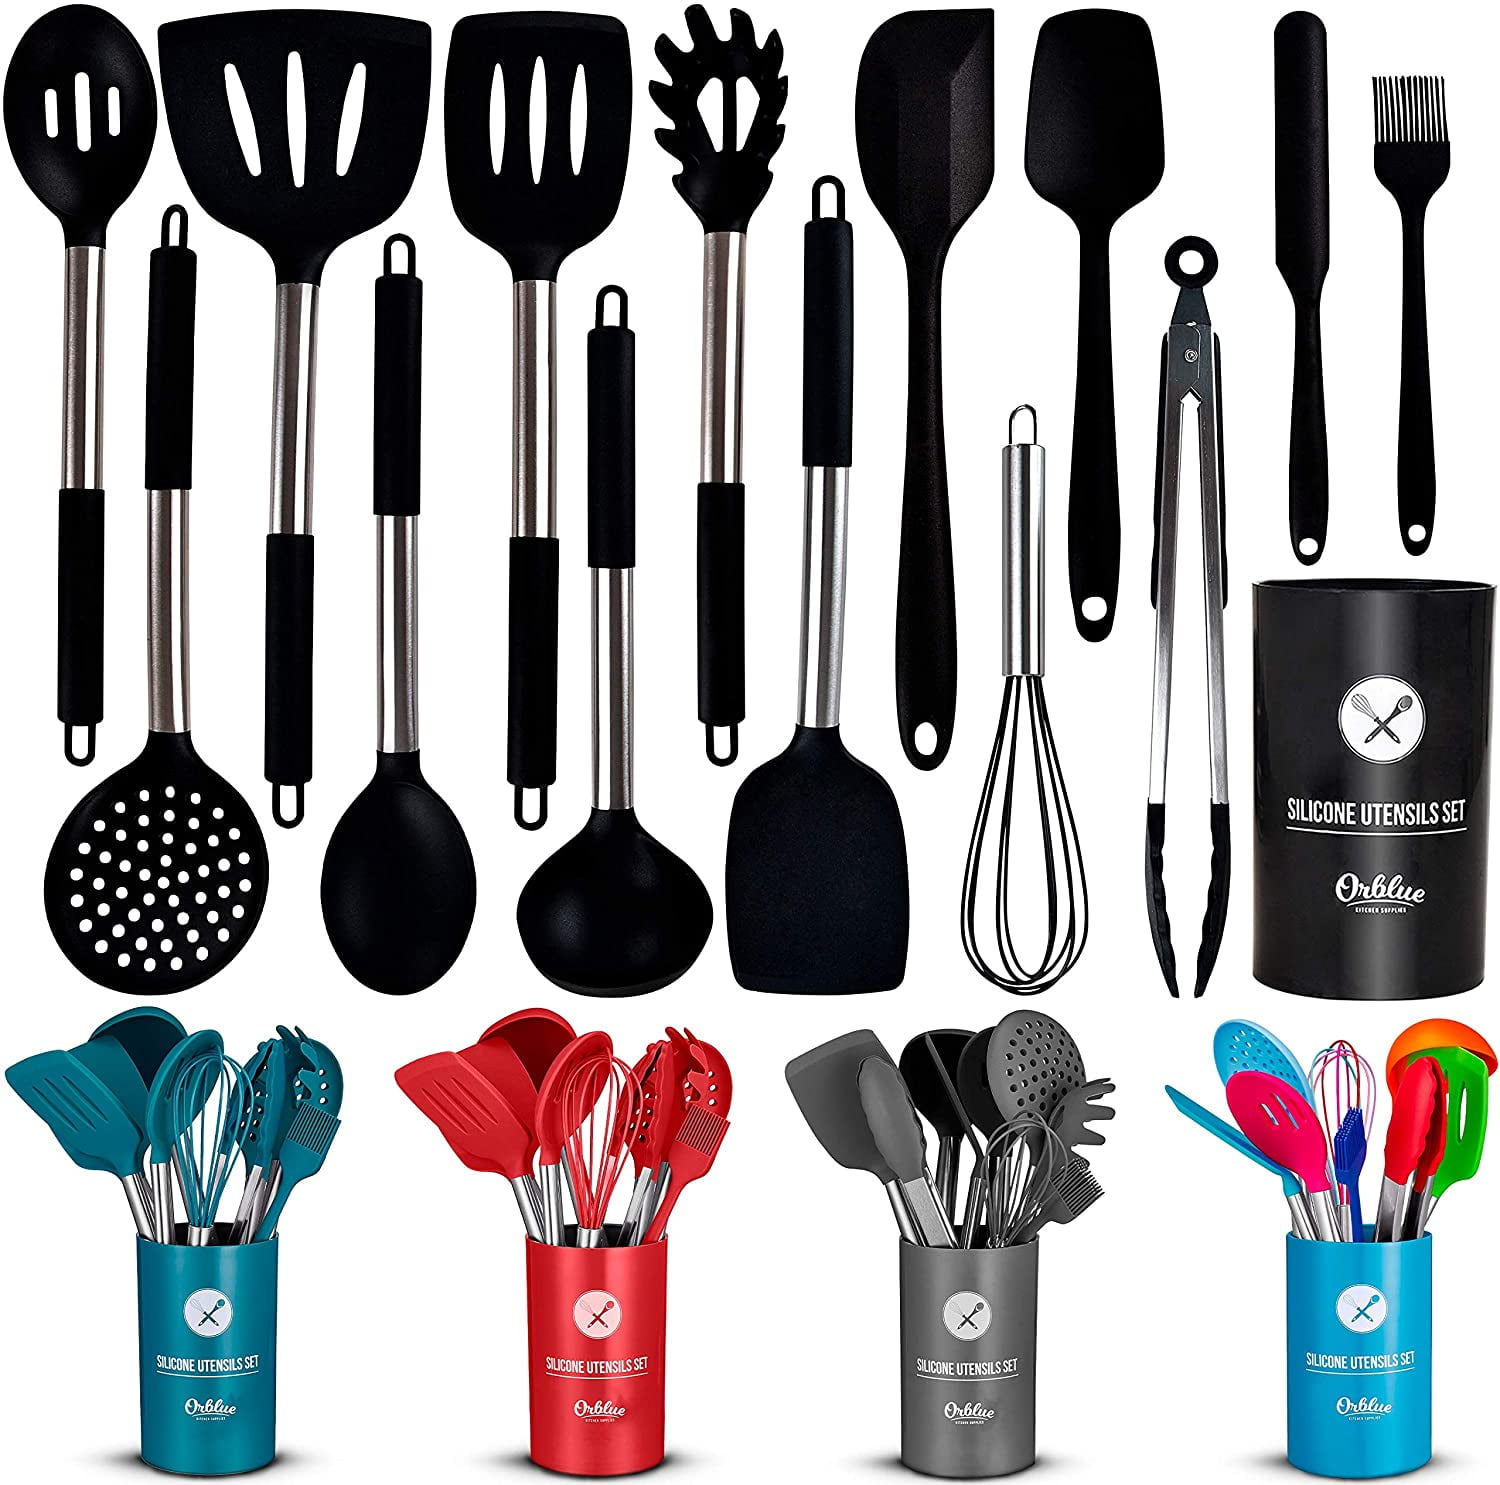 Kaluns Kitchen Utensils Set, 24 Piece Nylon And Stainless Steel Cooking  Utensils, Dishwasher Safe And Heat Resistant Kitchen Tools, Multi : Target